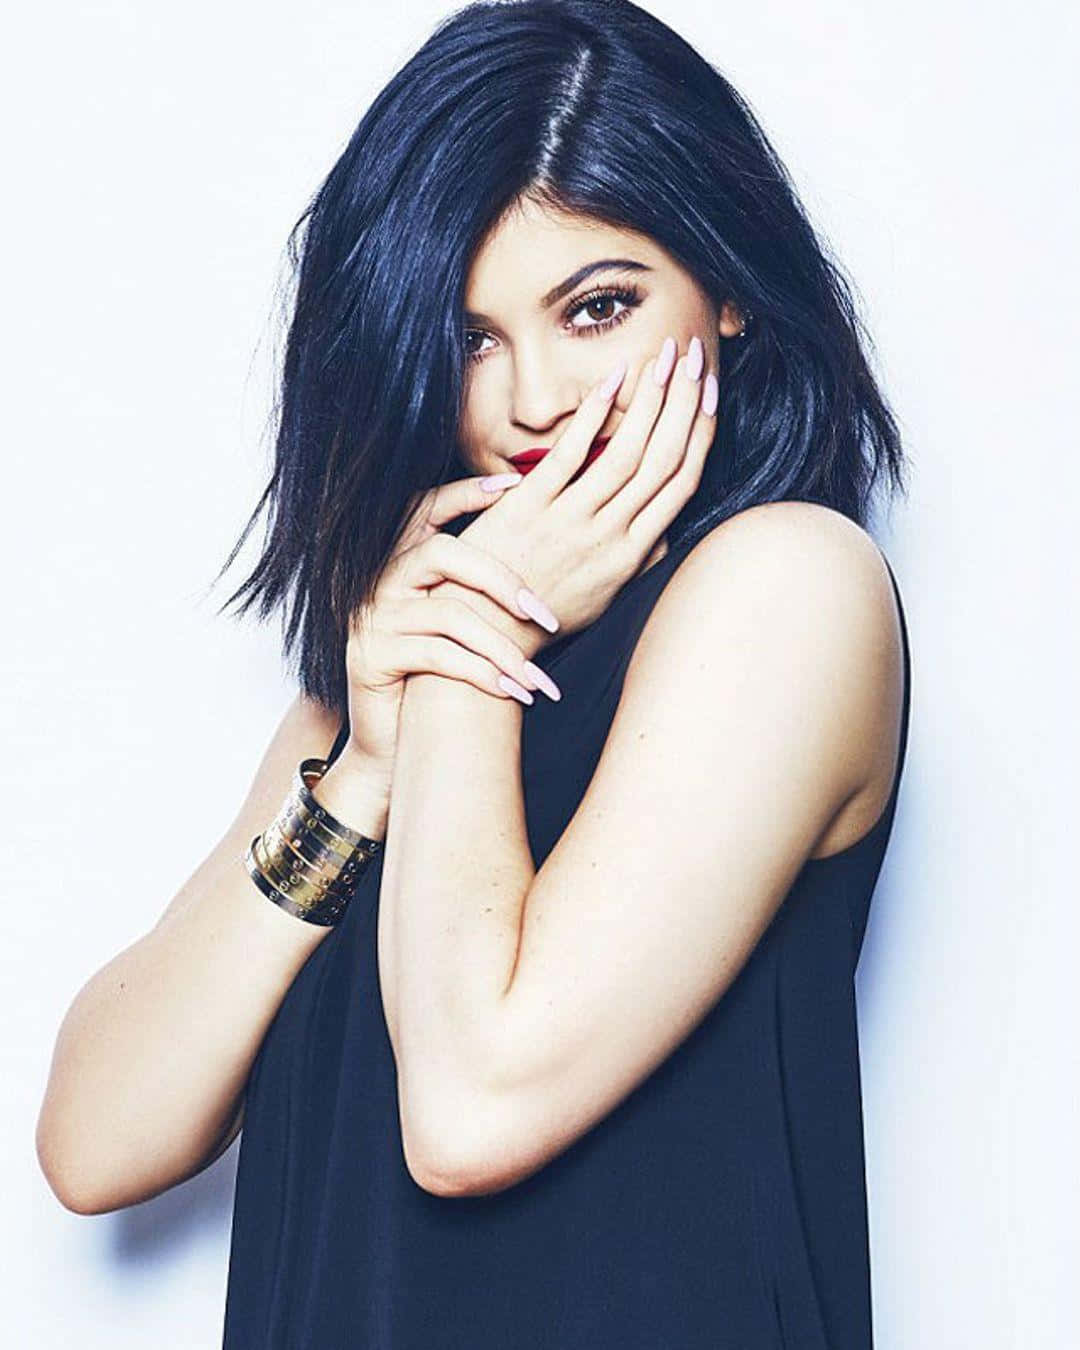 Kyliejenner Che Irradia Fiducia In Un Outfit Chic